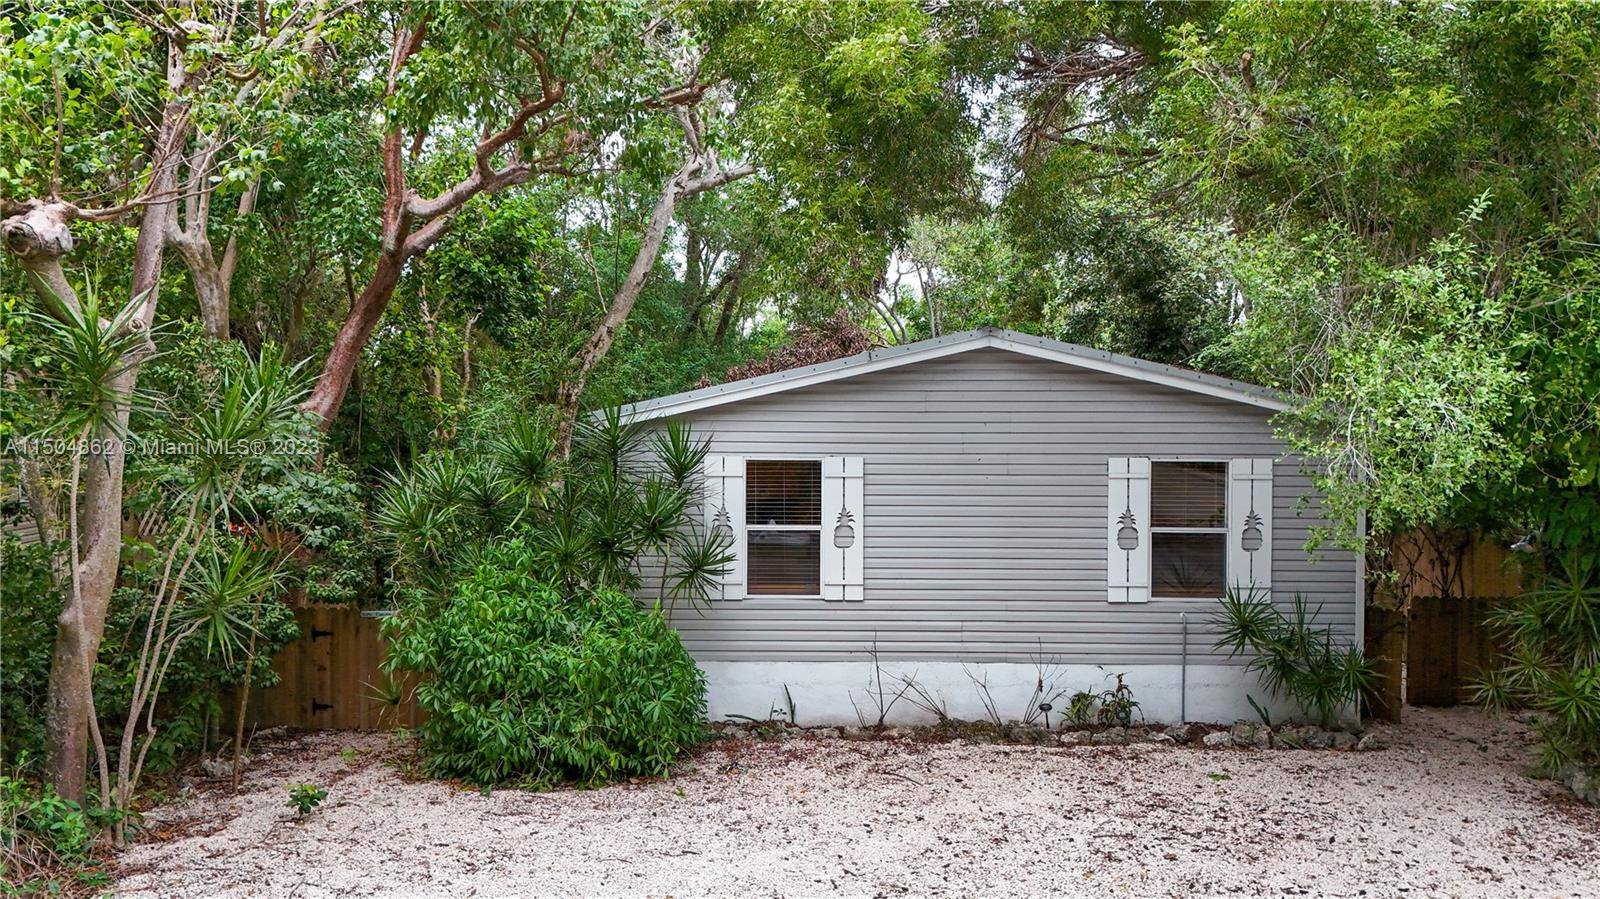 BEAUTIFUL 3 BEDROOMS 2 FULL BATHS Home CONVENIENTLY LOCATED IN UPPER KEY LARGO.